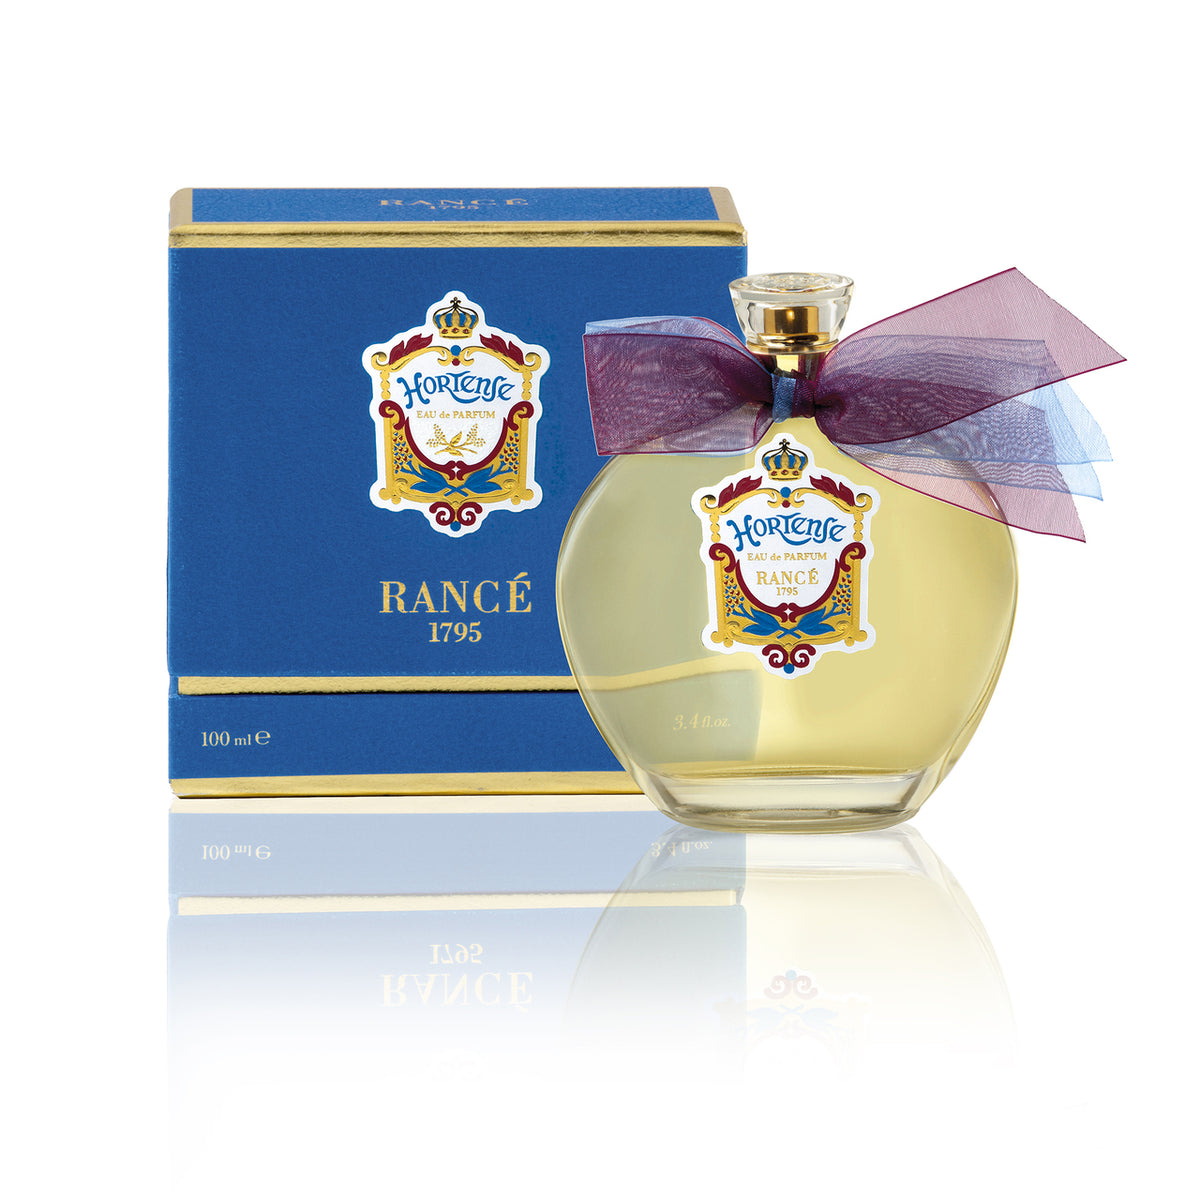 A Rancé perfume bottle with a golden cap and purple bow alongside its blue packaging which has gold detailing and textual emblems. The background is white with Oriental scents.